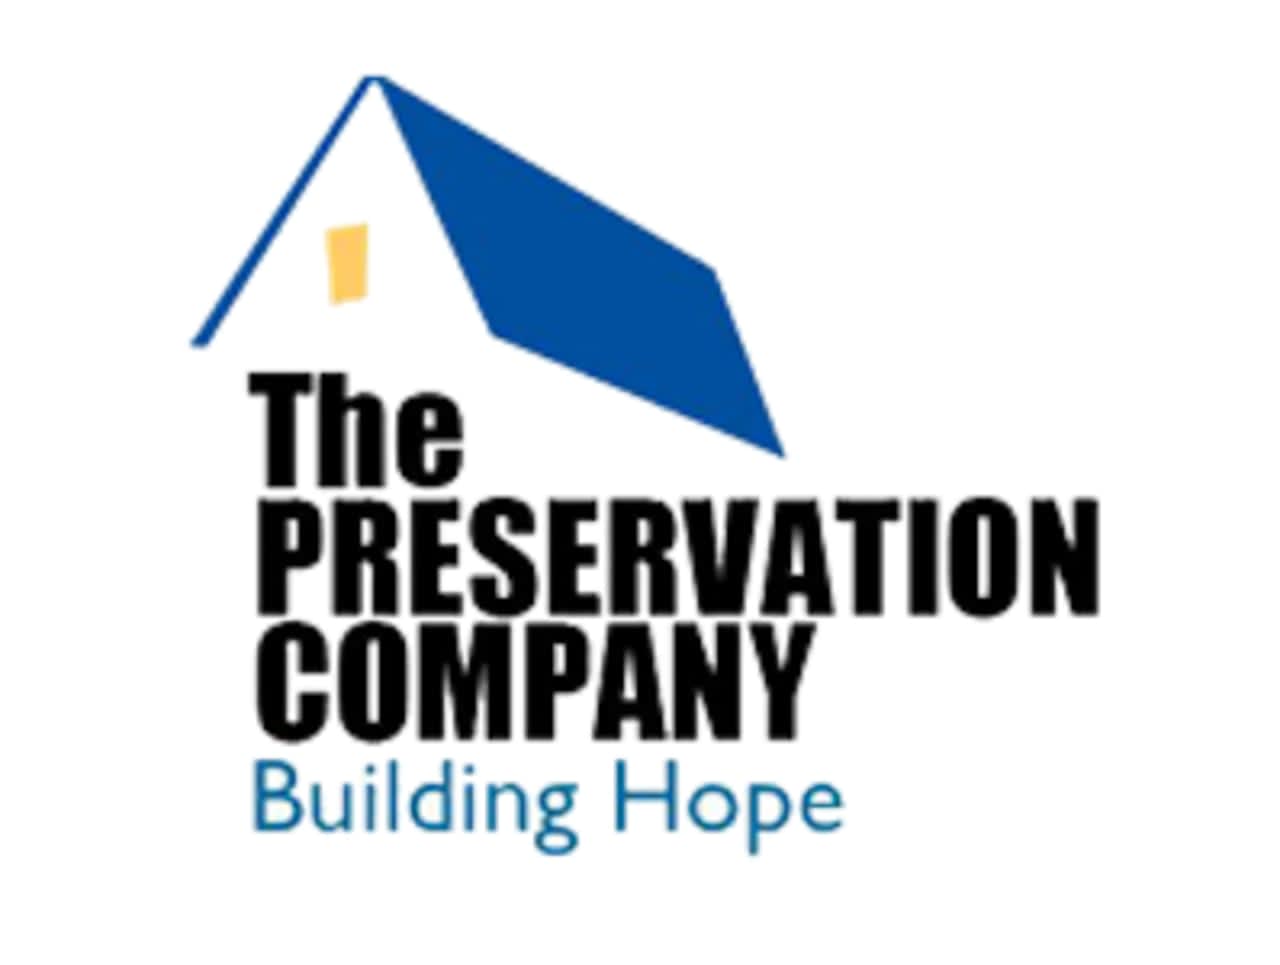 The Preservation Company, Inc. increases access to housing for low and moderate-income families, and advances community development and revitalization.